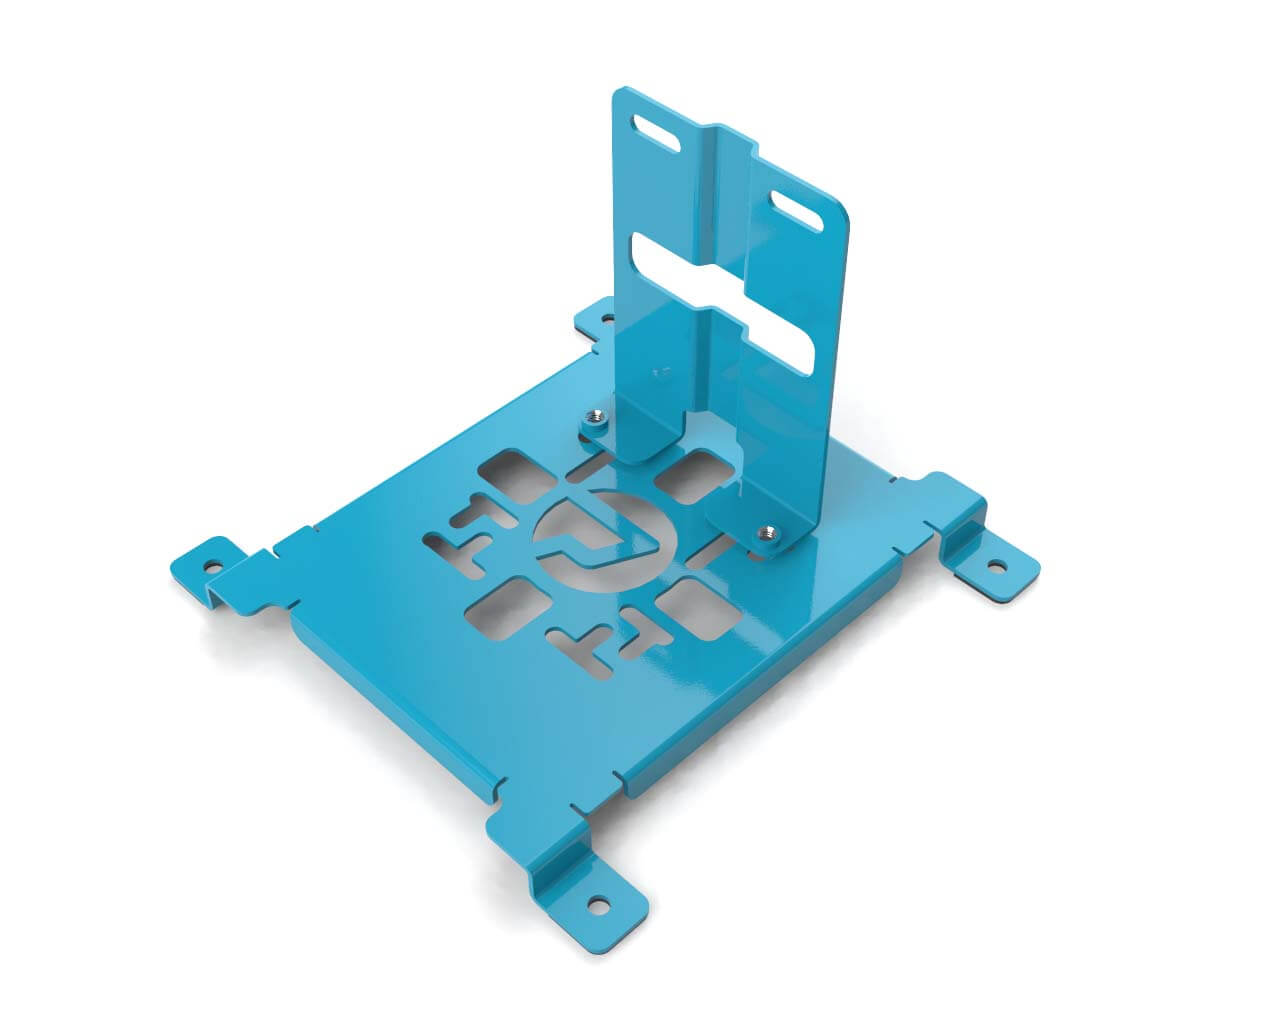 PrimoChill SX CTR2 Spider Mount Bracket Kit - 140mm Series - PrimoChill - KEEPING IT COOL Sky Blue